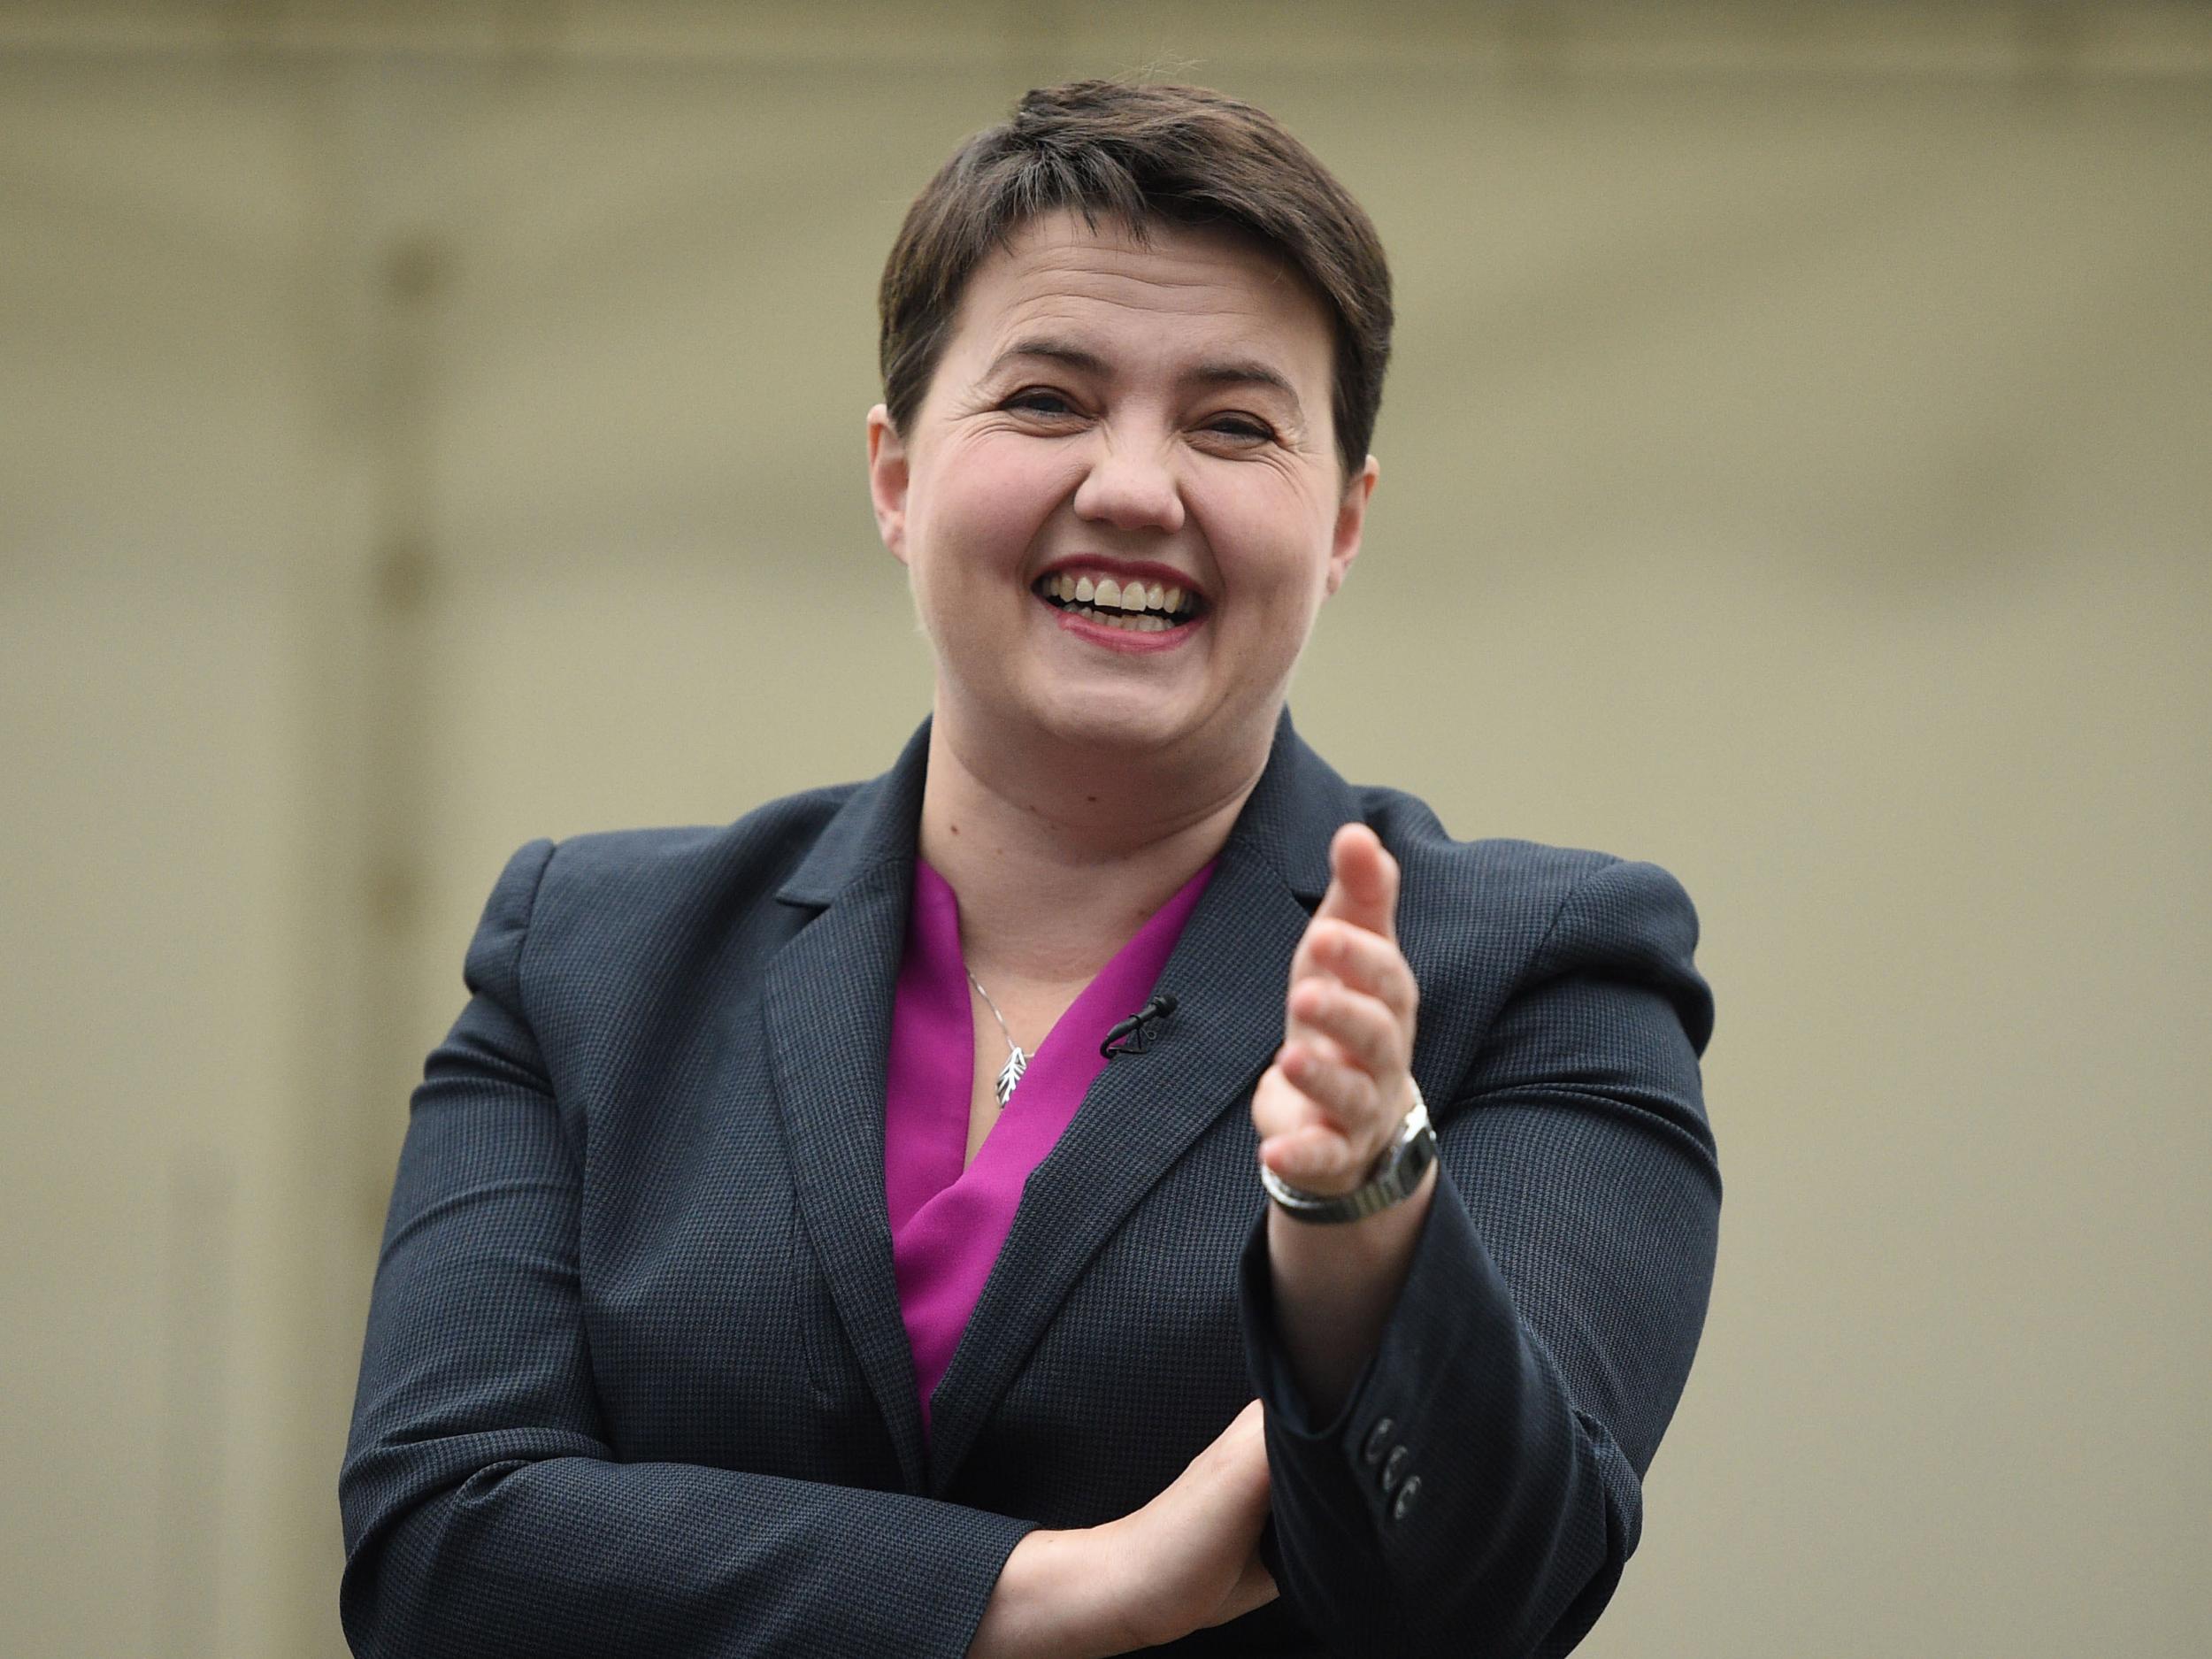 The Tory leader in Scotland is credited with pioneering a warmer brand of Conservatism north of the border that many in her party would like to replicate in England